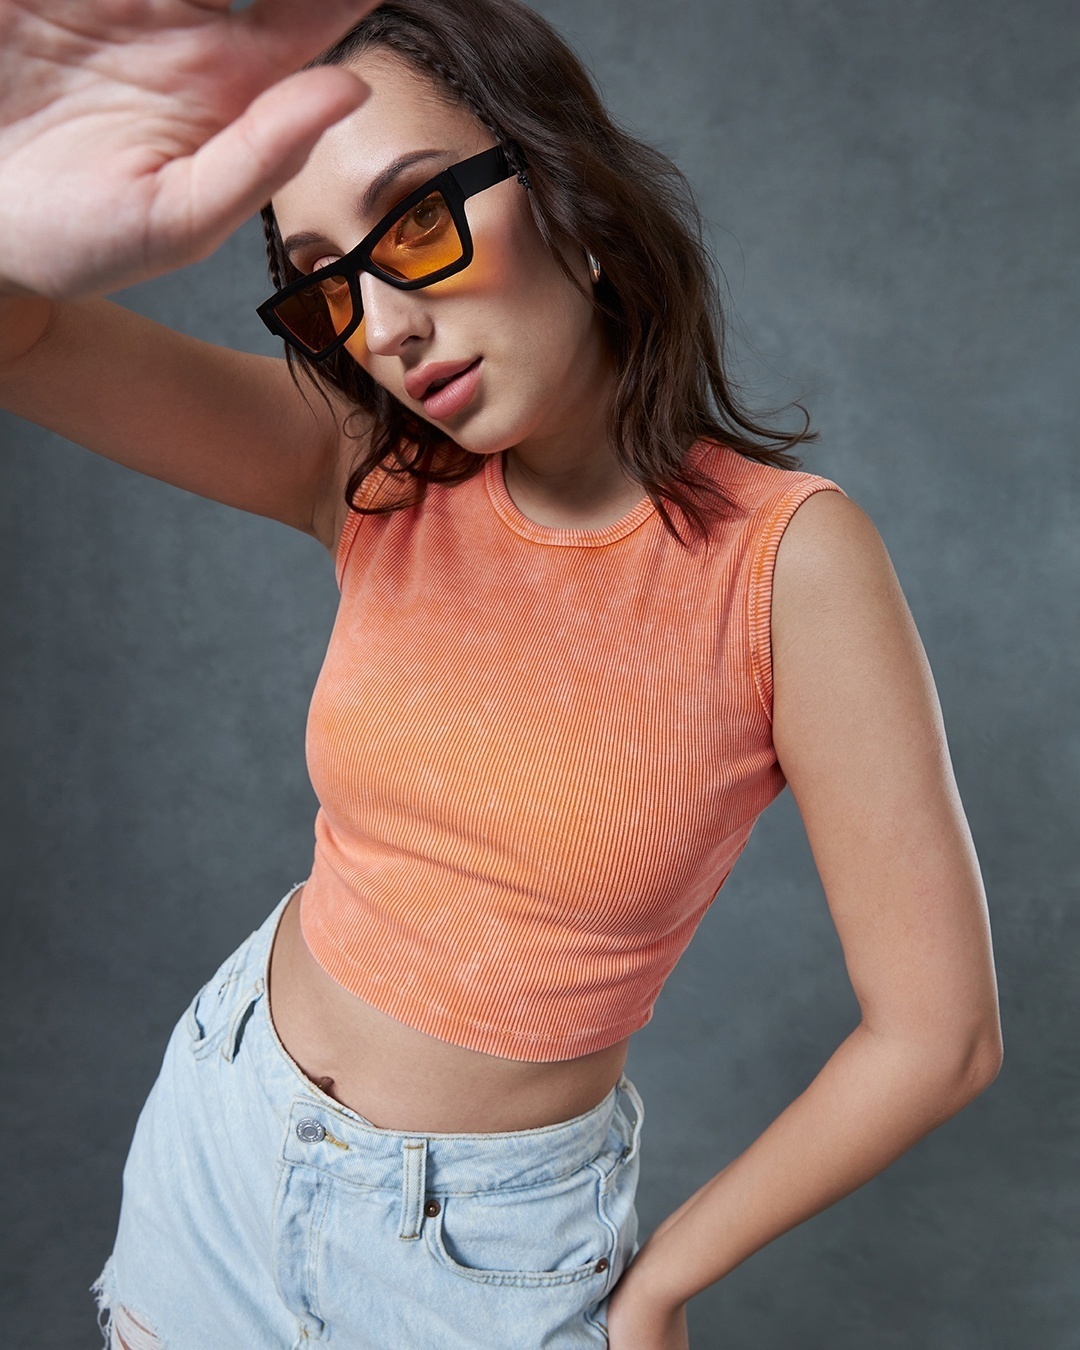 Women's Orange Slim Fit Short Top paired with baggy jeans